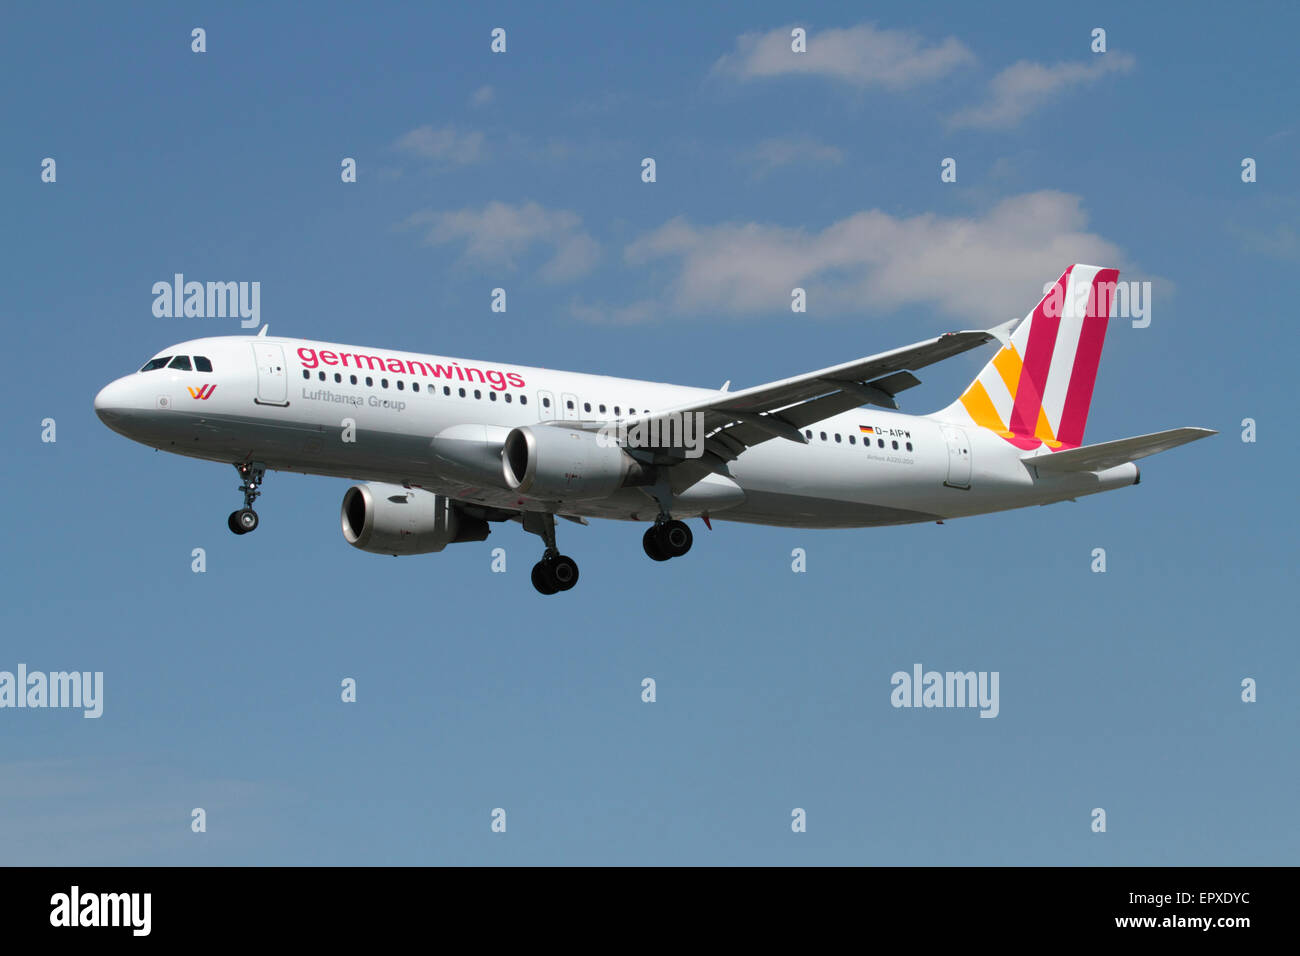 Low cost air travel. Airbus A320 passenger jet belonging to budget airline Germanwings on approach Stock Photo